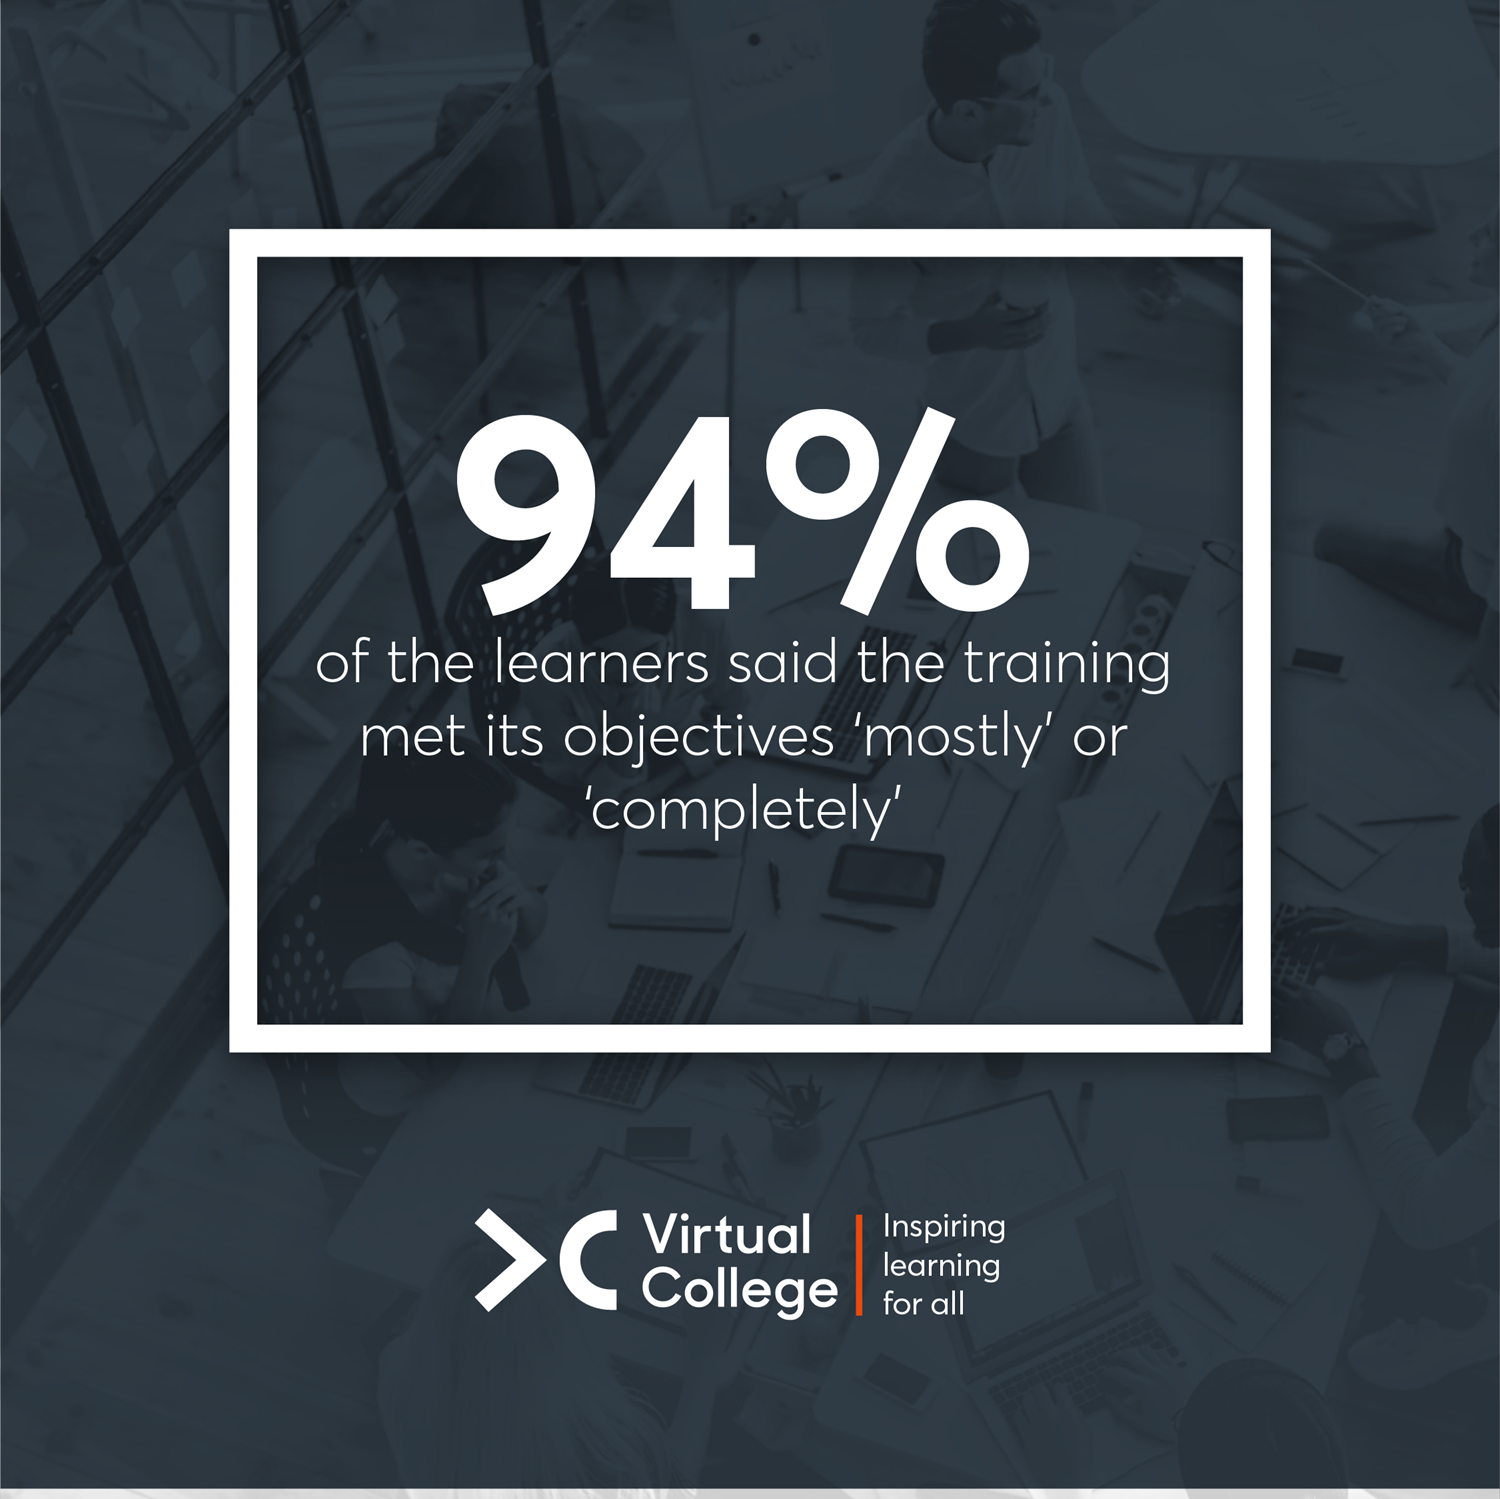 94% of the learners said the training met its objectives ‘mostly’ or ‘completely’